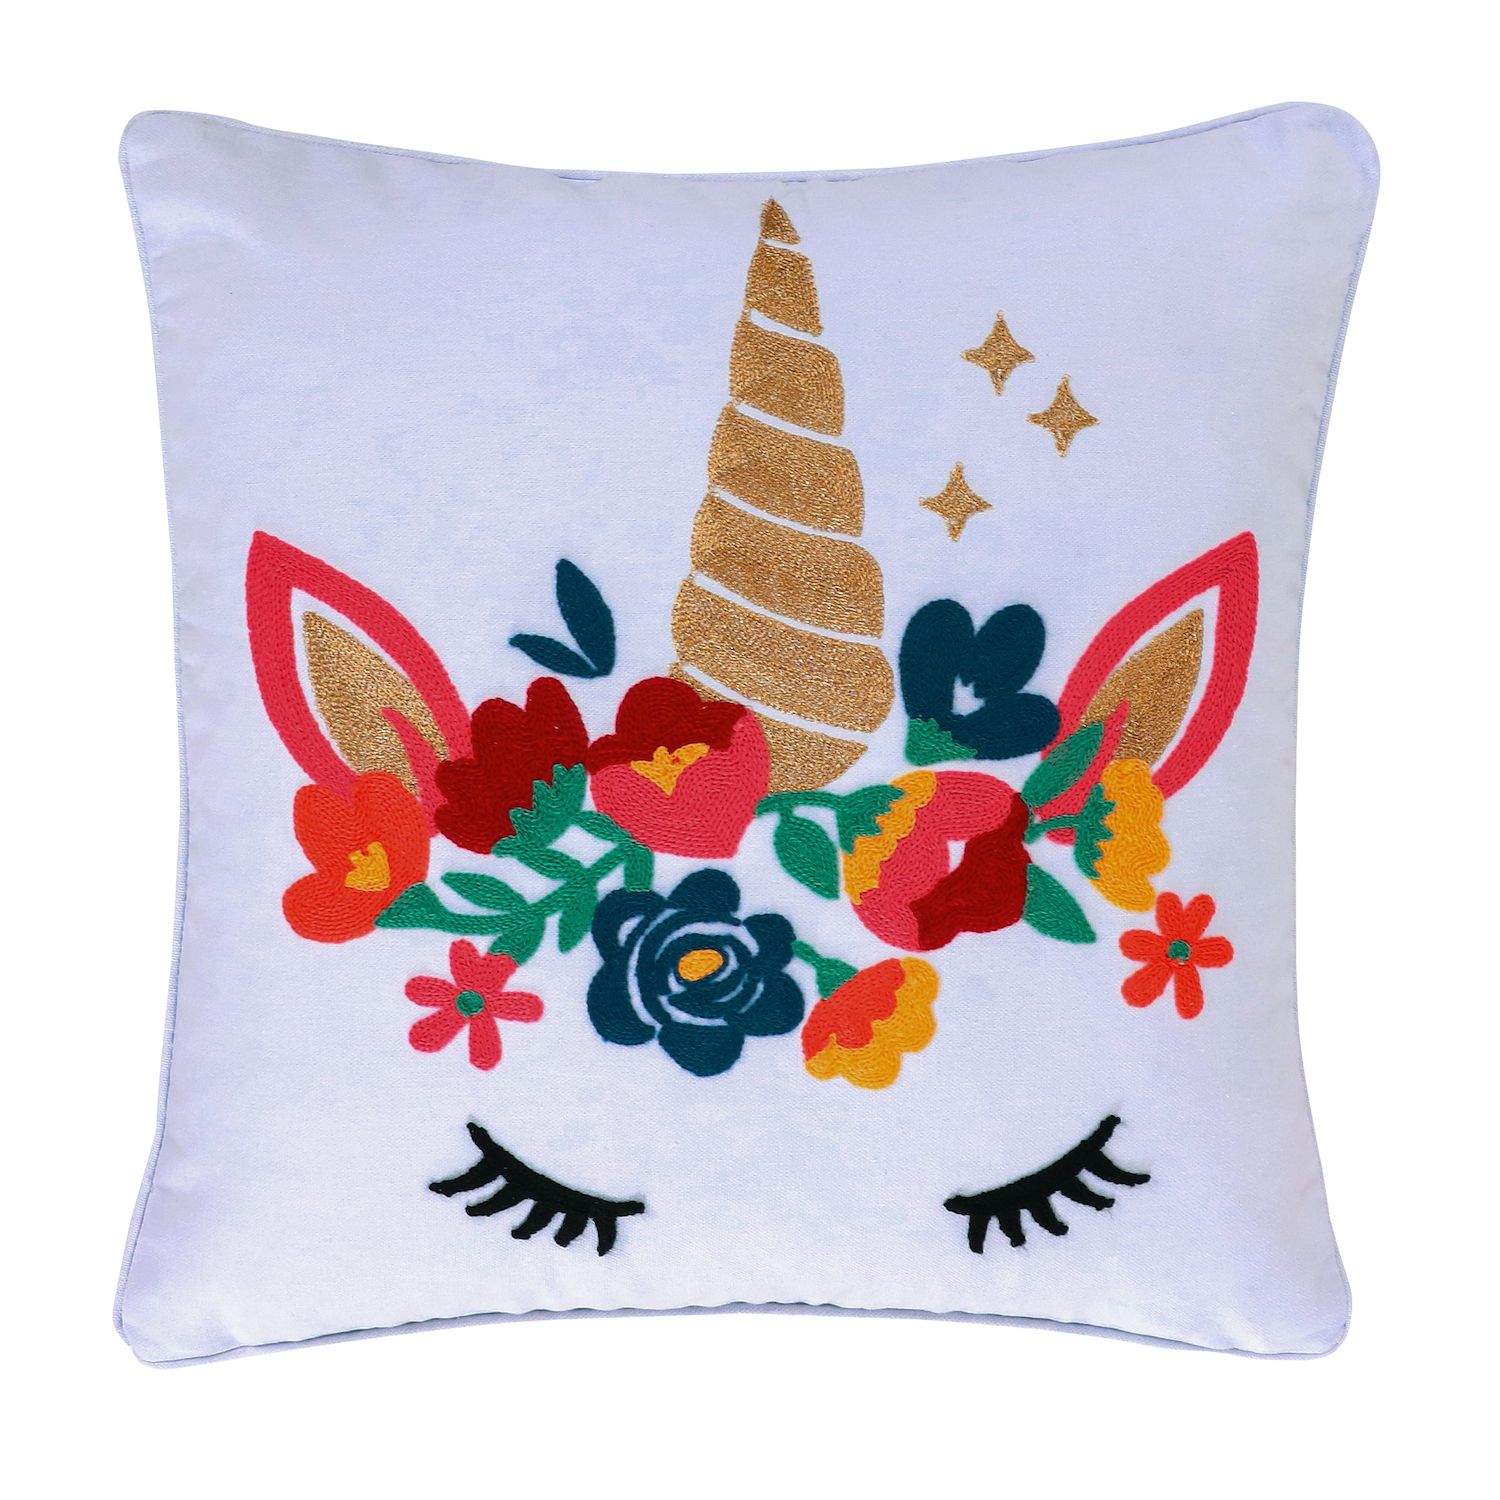 Image for Levtex Home Arte Boema Chantal Unicorn Embroidered Pillow at Kohl's.